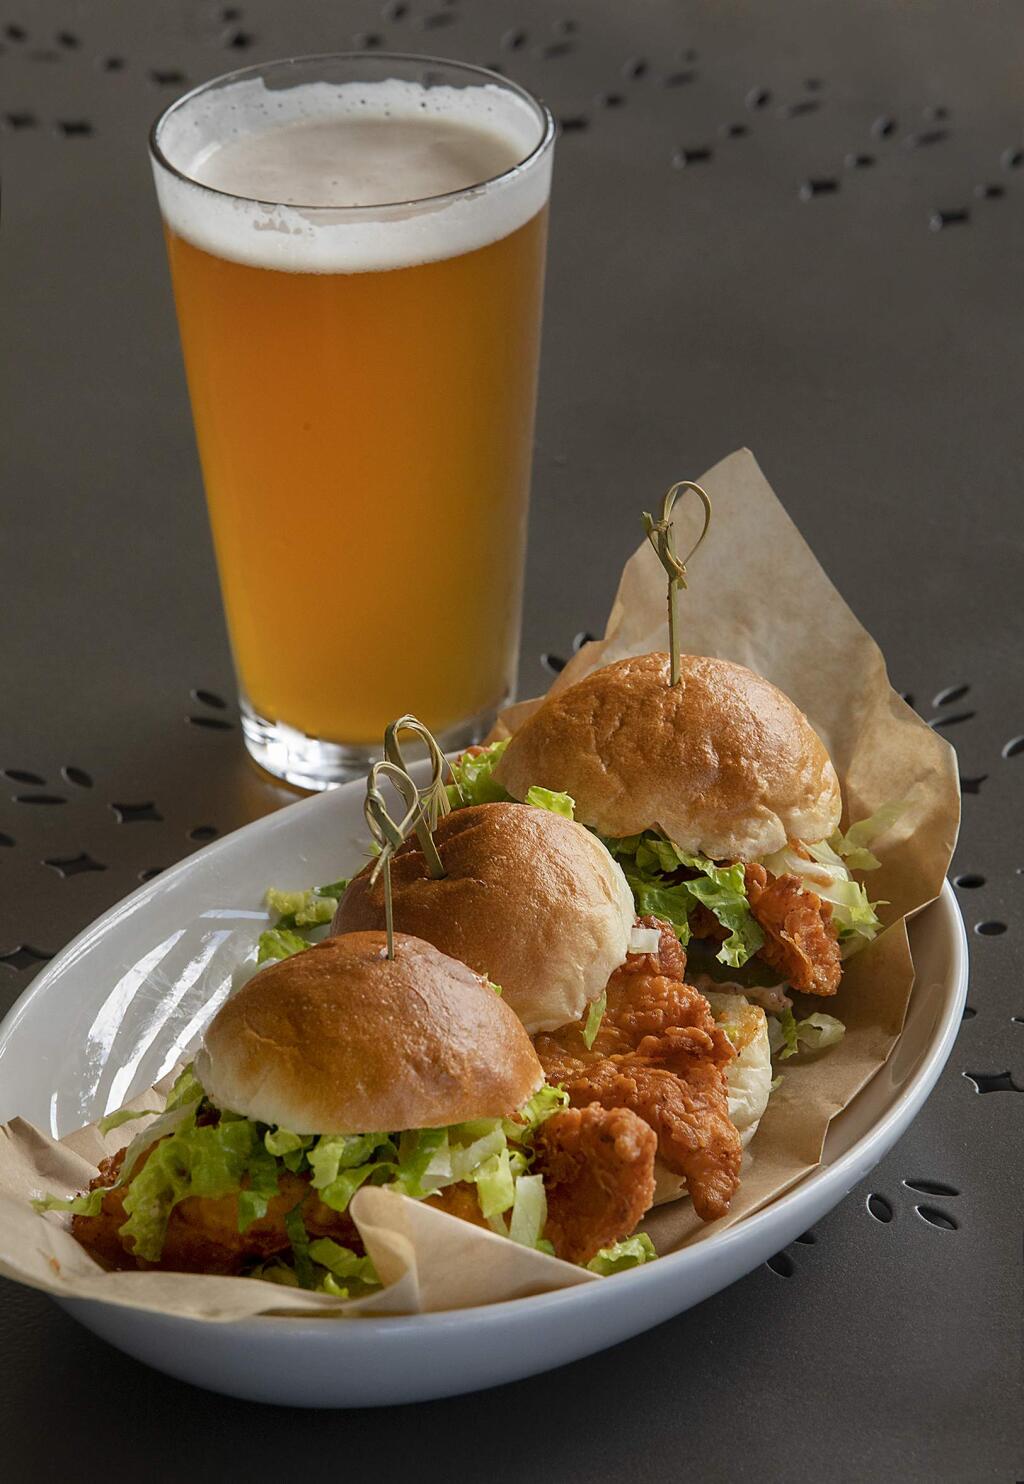 Fried Chicken Sliders with Cajun mayonnaise and dill pickle from Sweet T's Restaurant + Bar in Windsor. (photo by John Burgess/The Press Democrat)